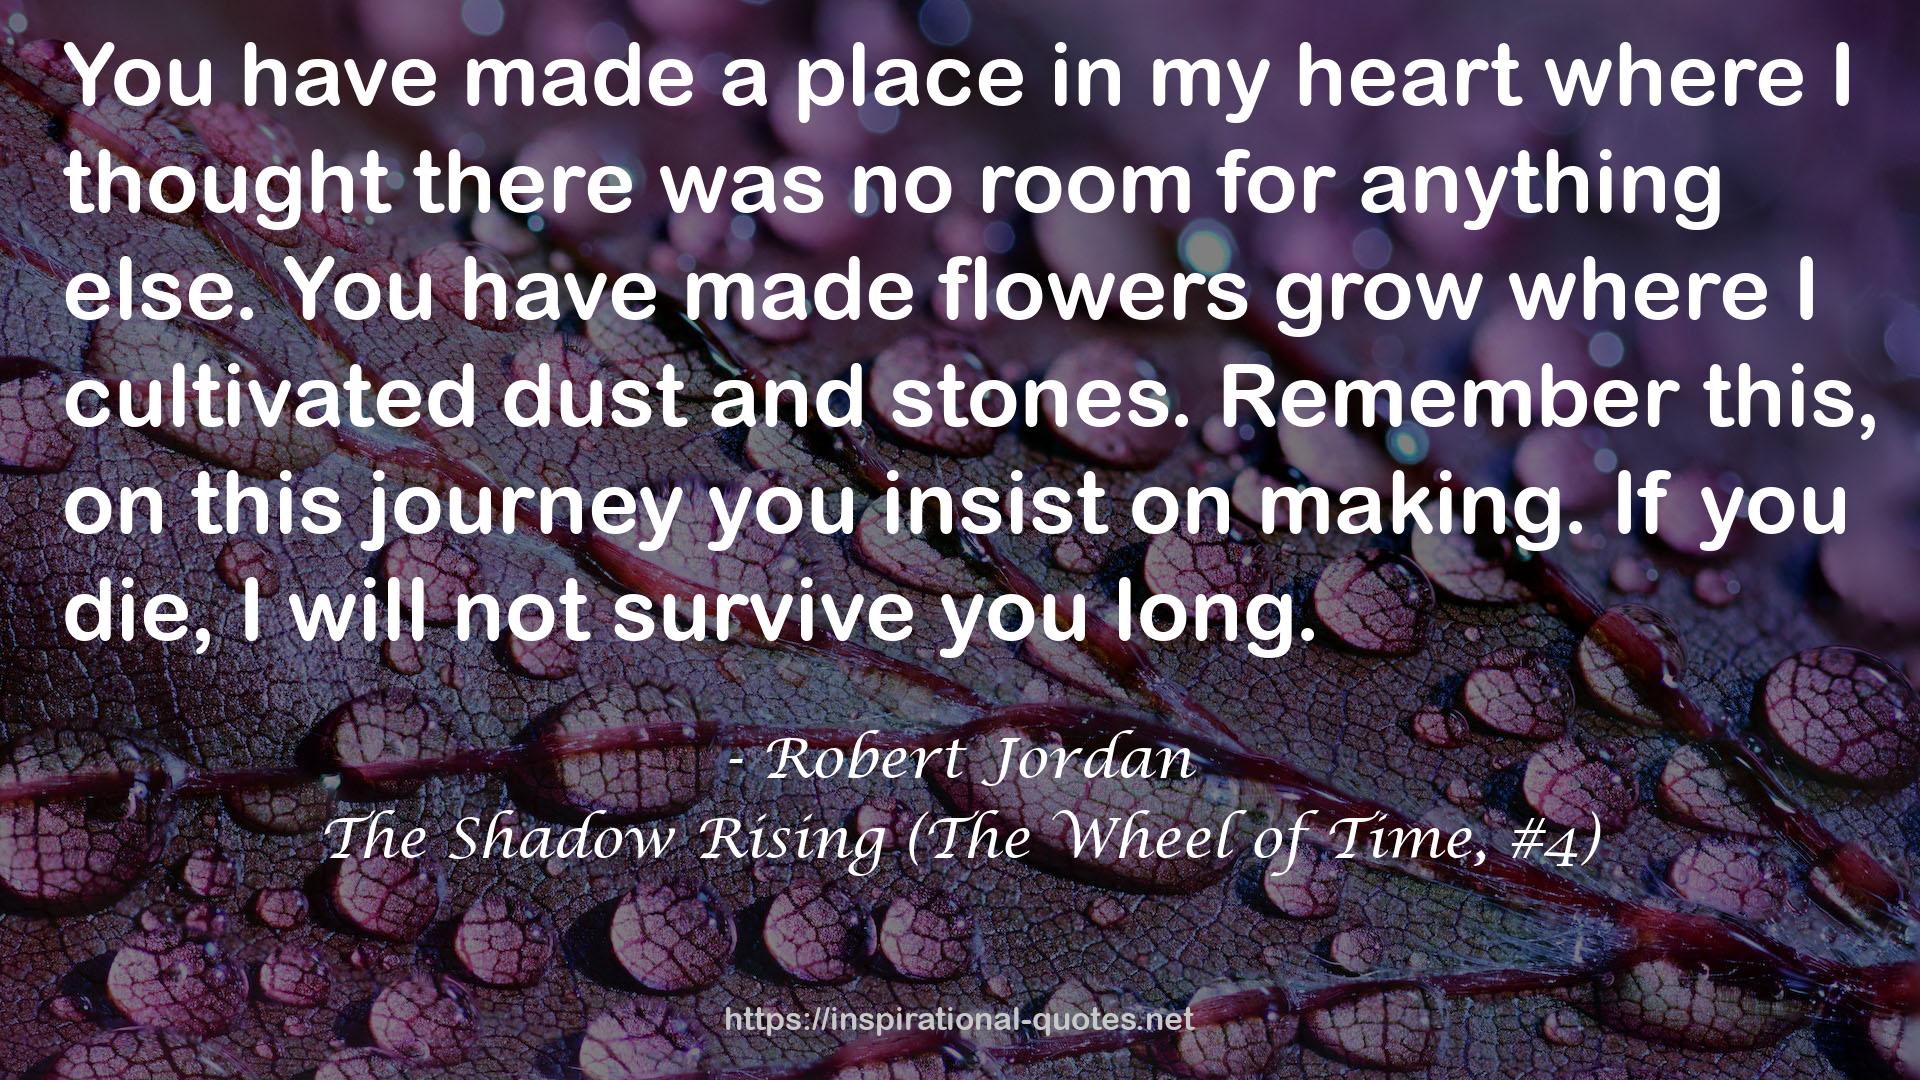 The Shadow Rising (The Wheel of Time, #4) QUOTES